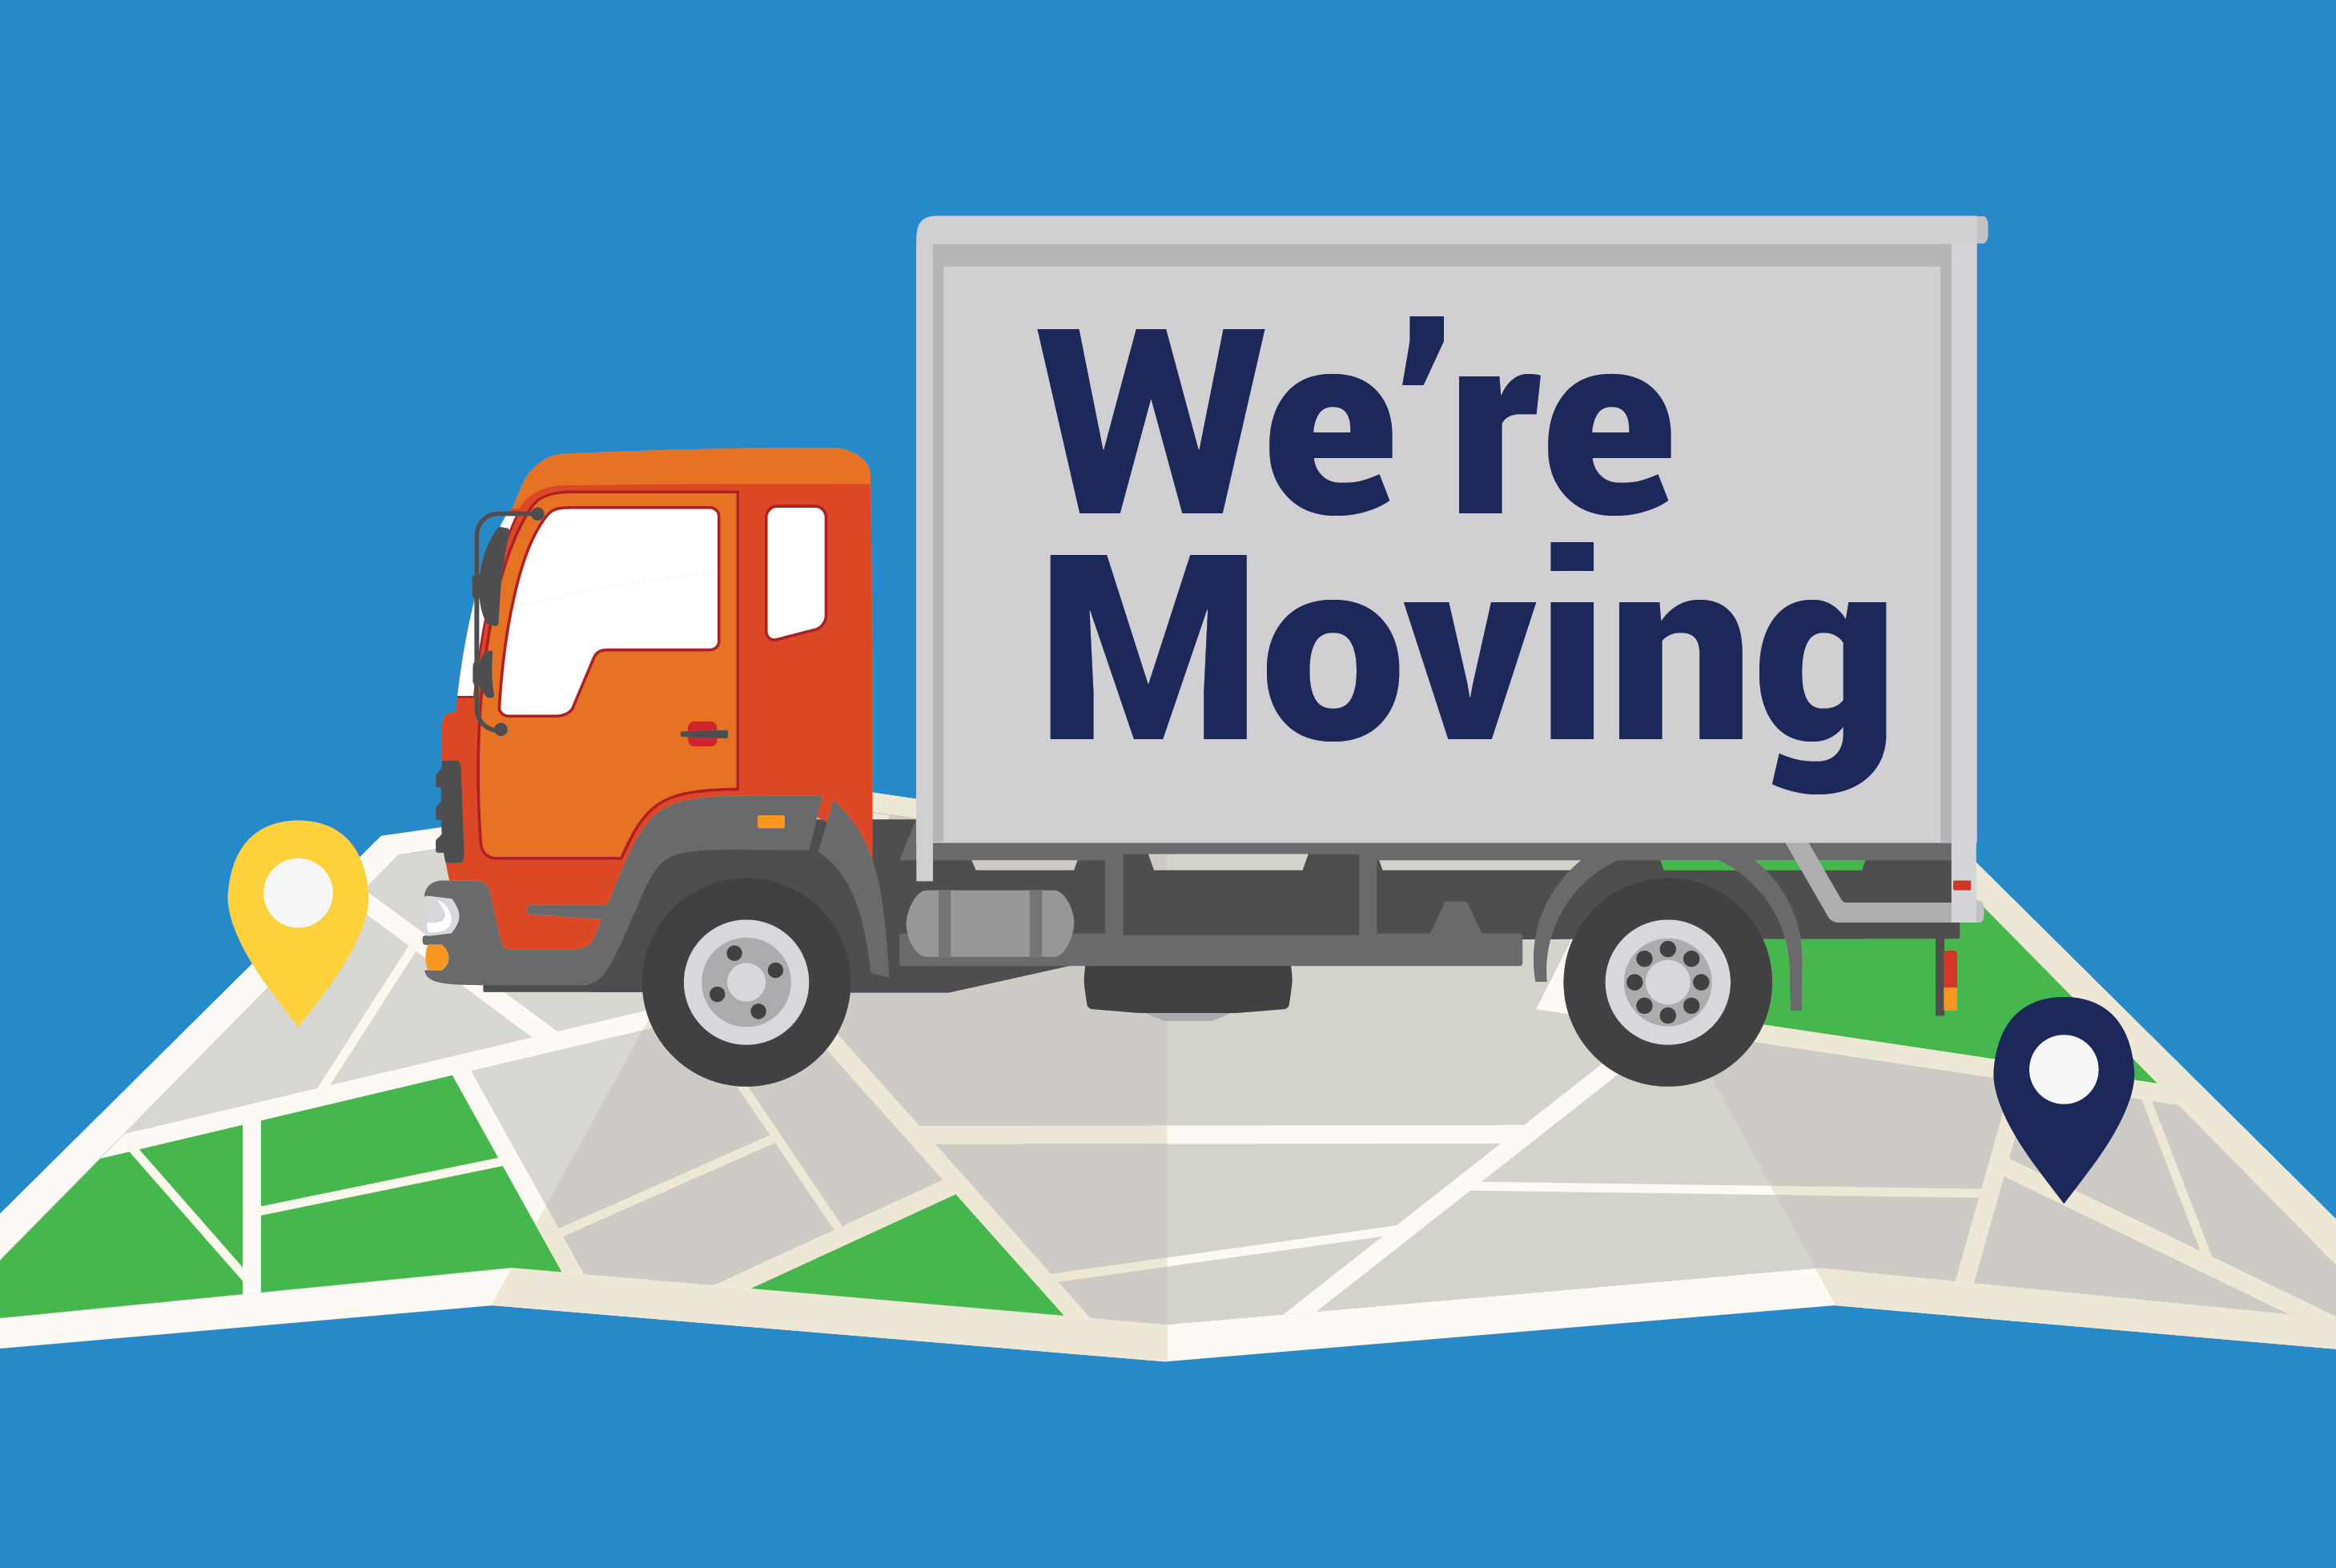 A dynamic graphic illustration featuring a moving truck sitting on a map between two pinned locations, with the caption 'We're Moving' prominently displayed on the side of the truck